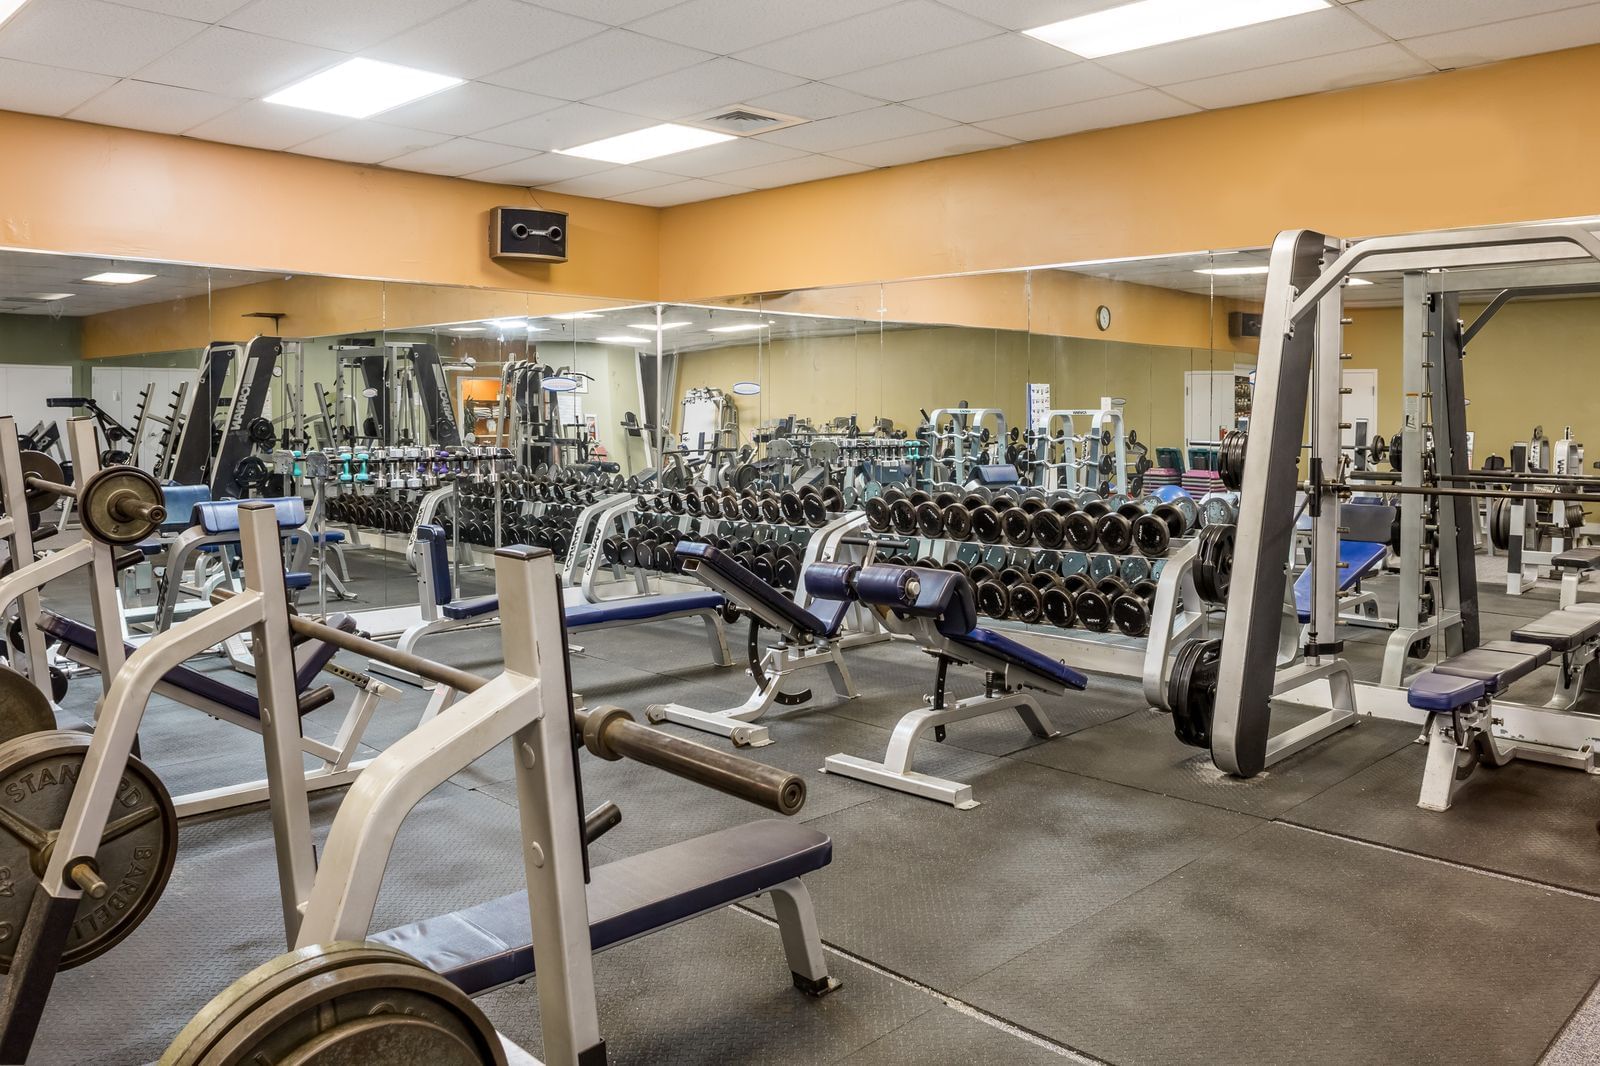 Fitness room with multiple workout stations.